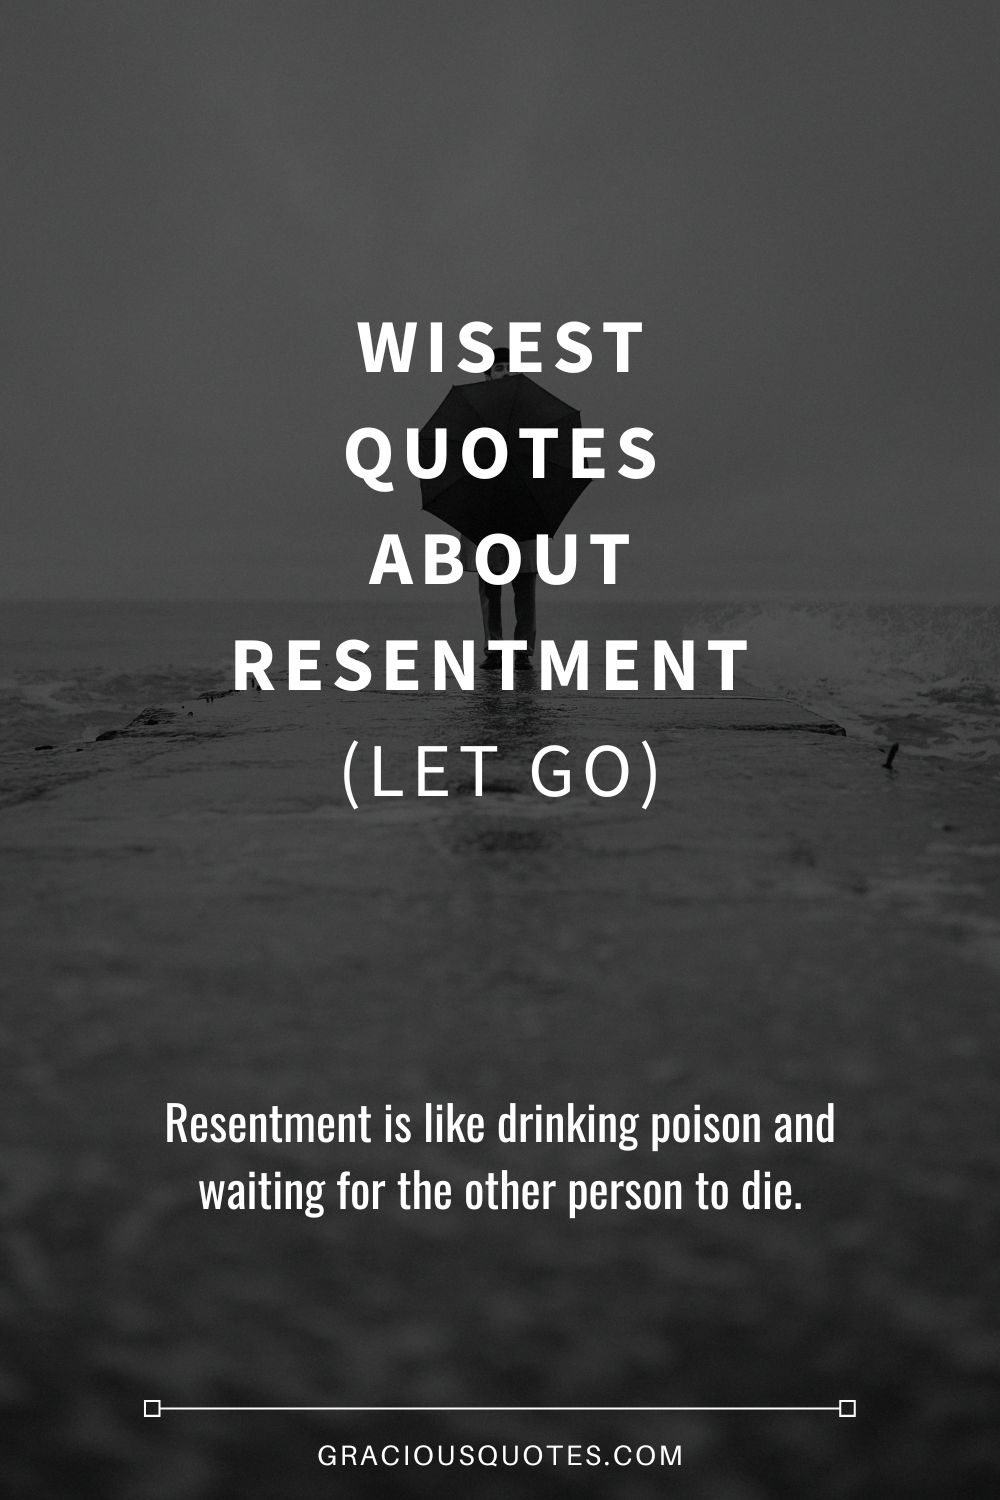 Wisest Quotes About Resentment (LET GO) - Gracious Quotes